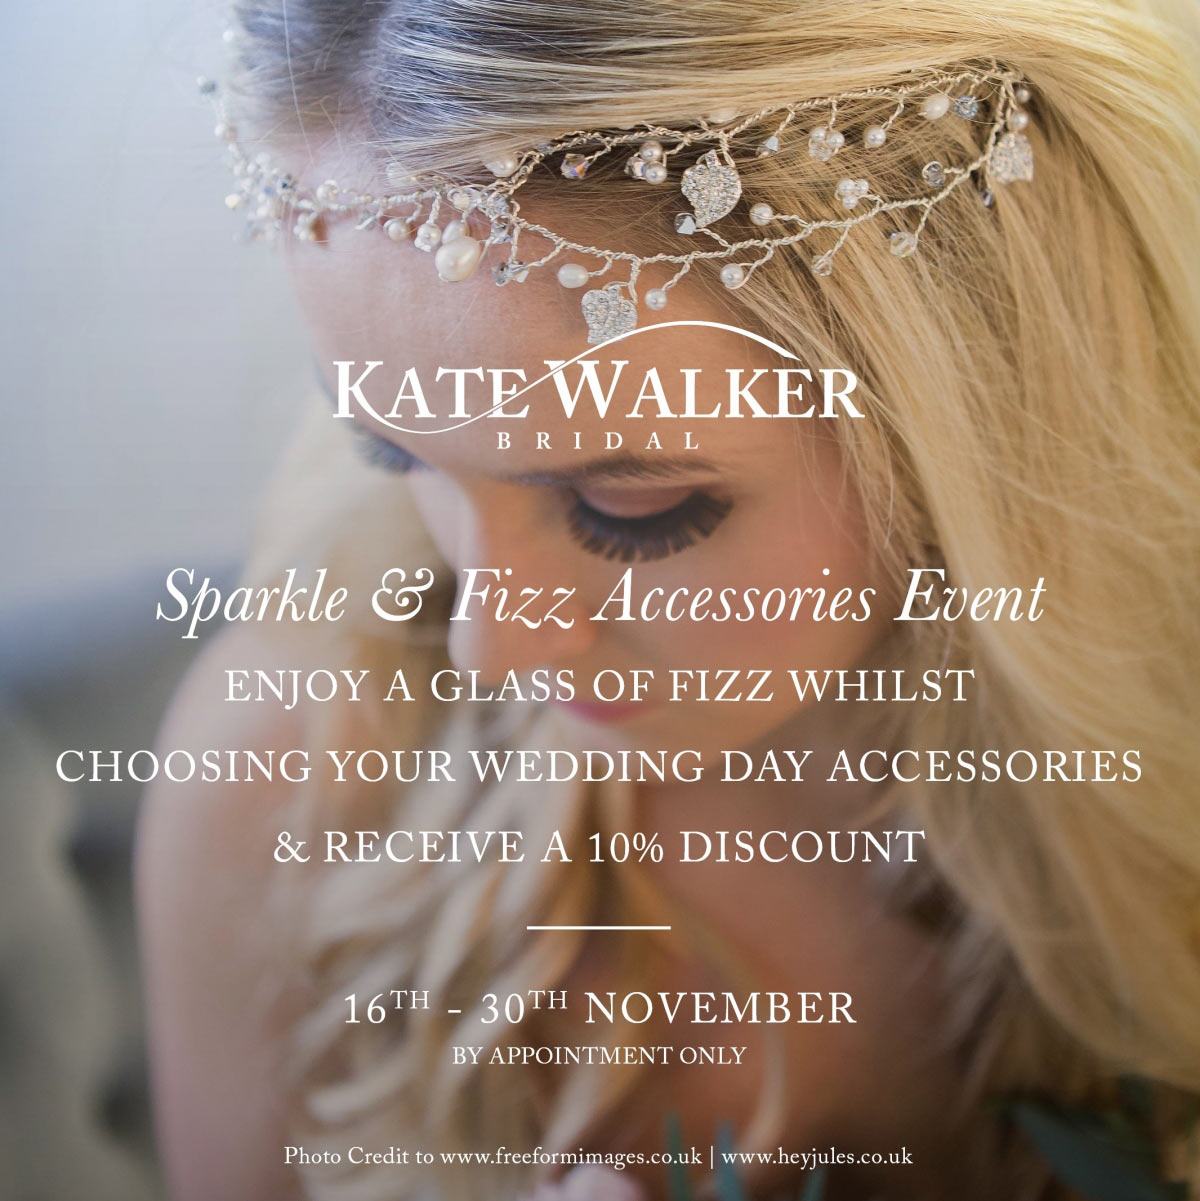 Sparkle and Fizz Accessories Event at Kate Walker Bridal